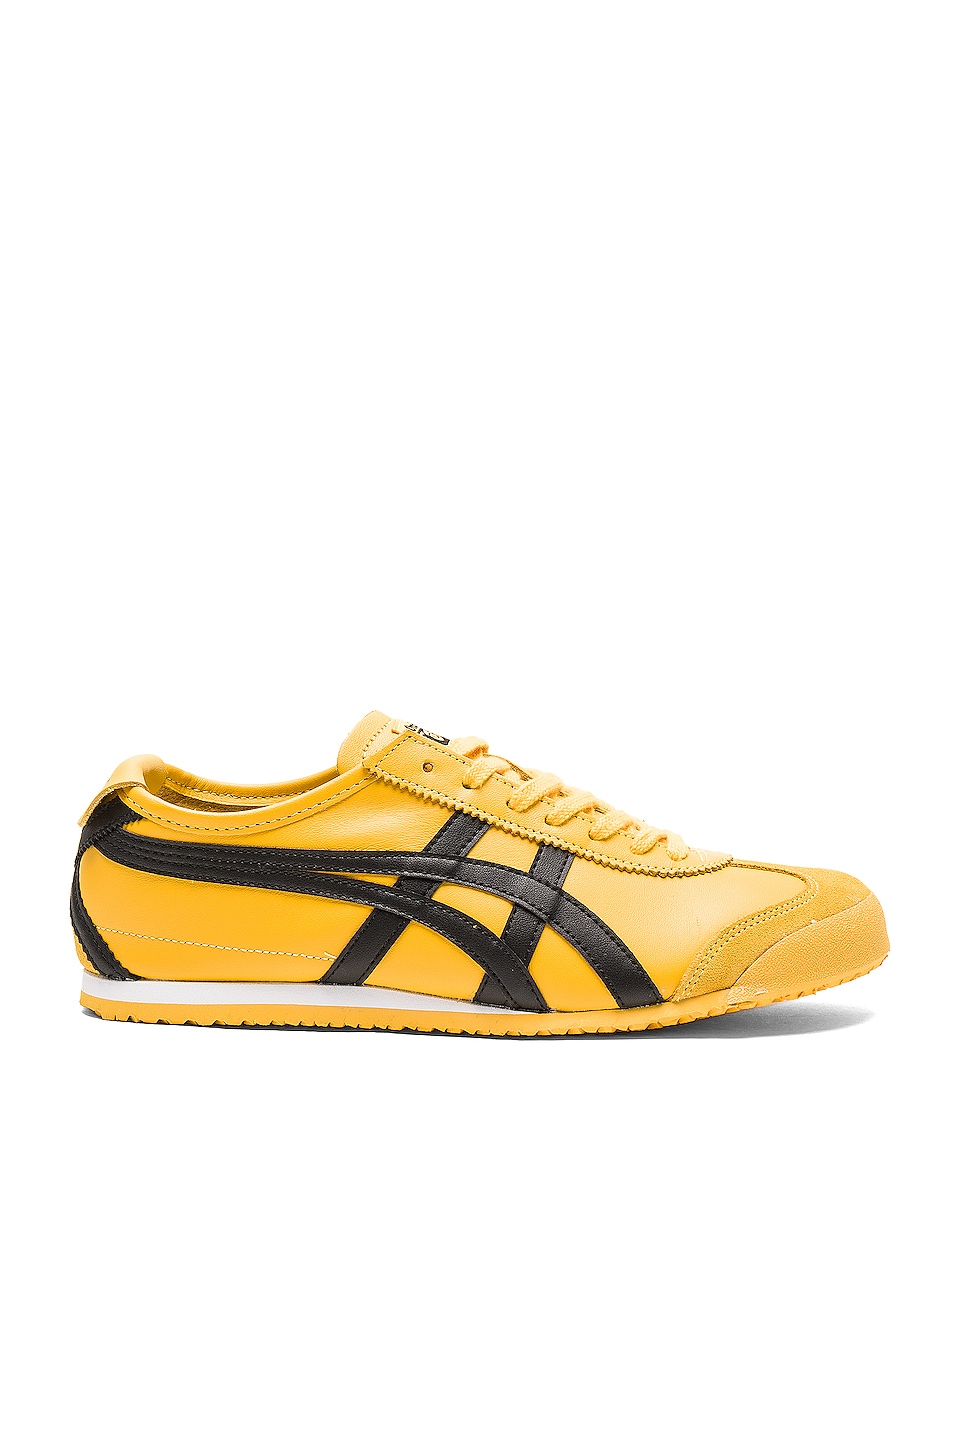 Onitsuka Tiger Mexico 66 in Yellow Black | REVOLVE